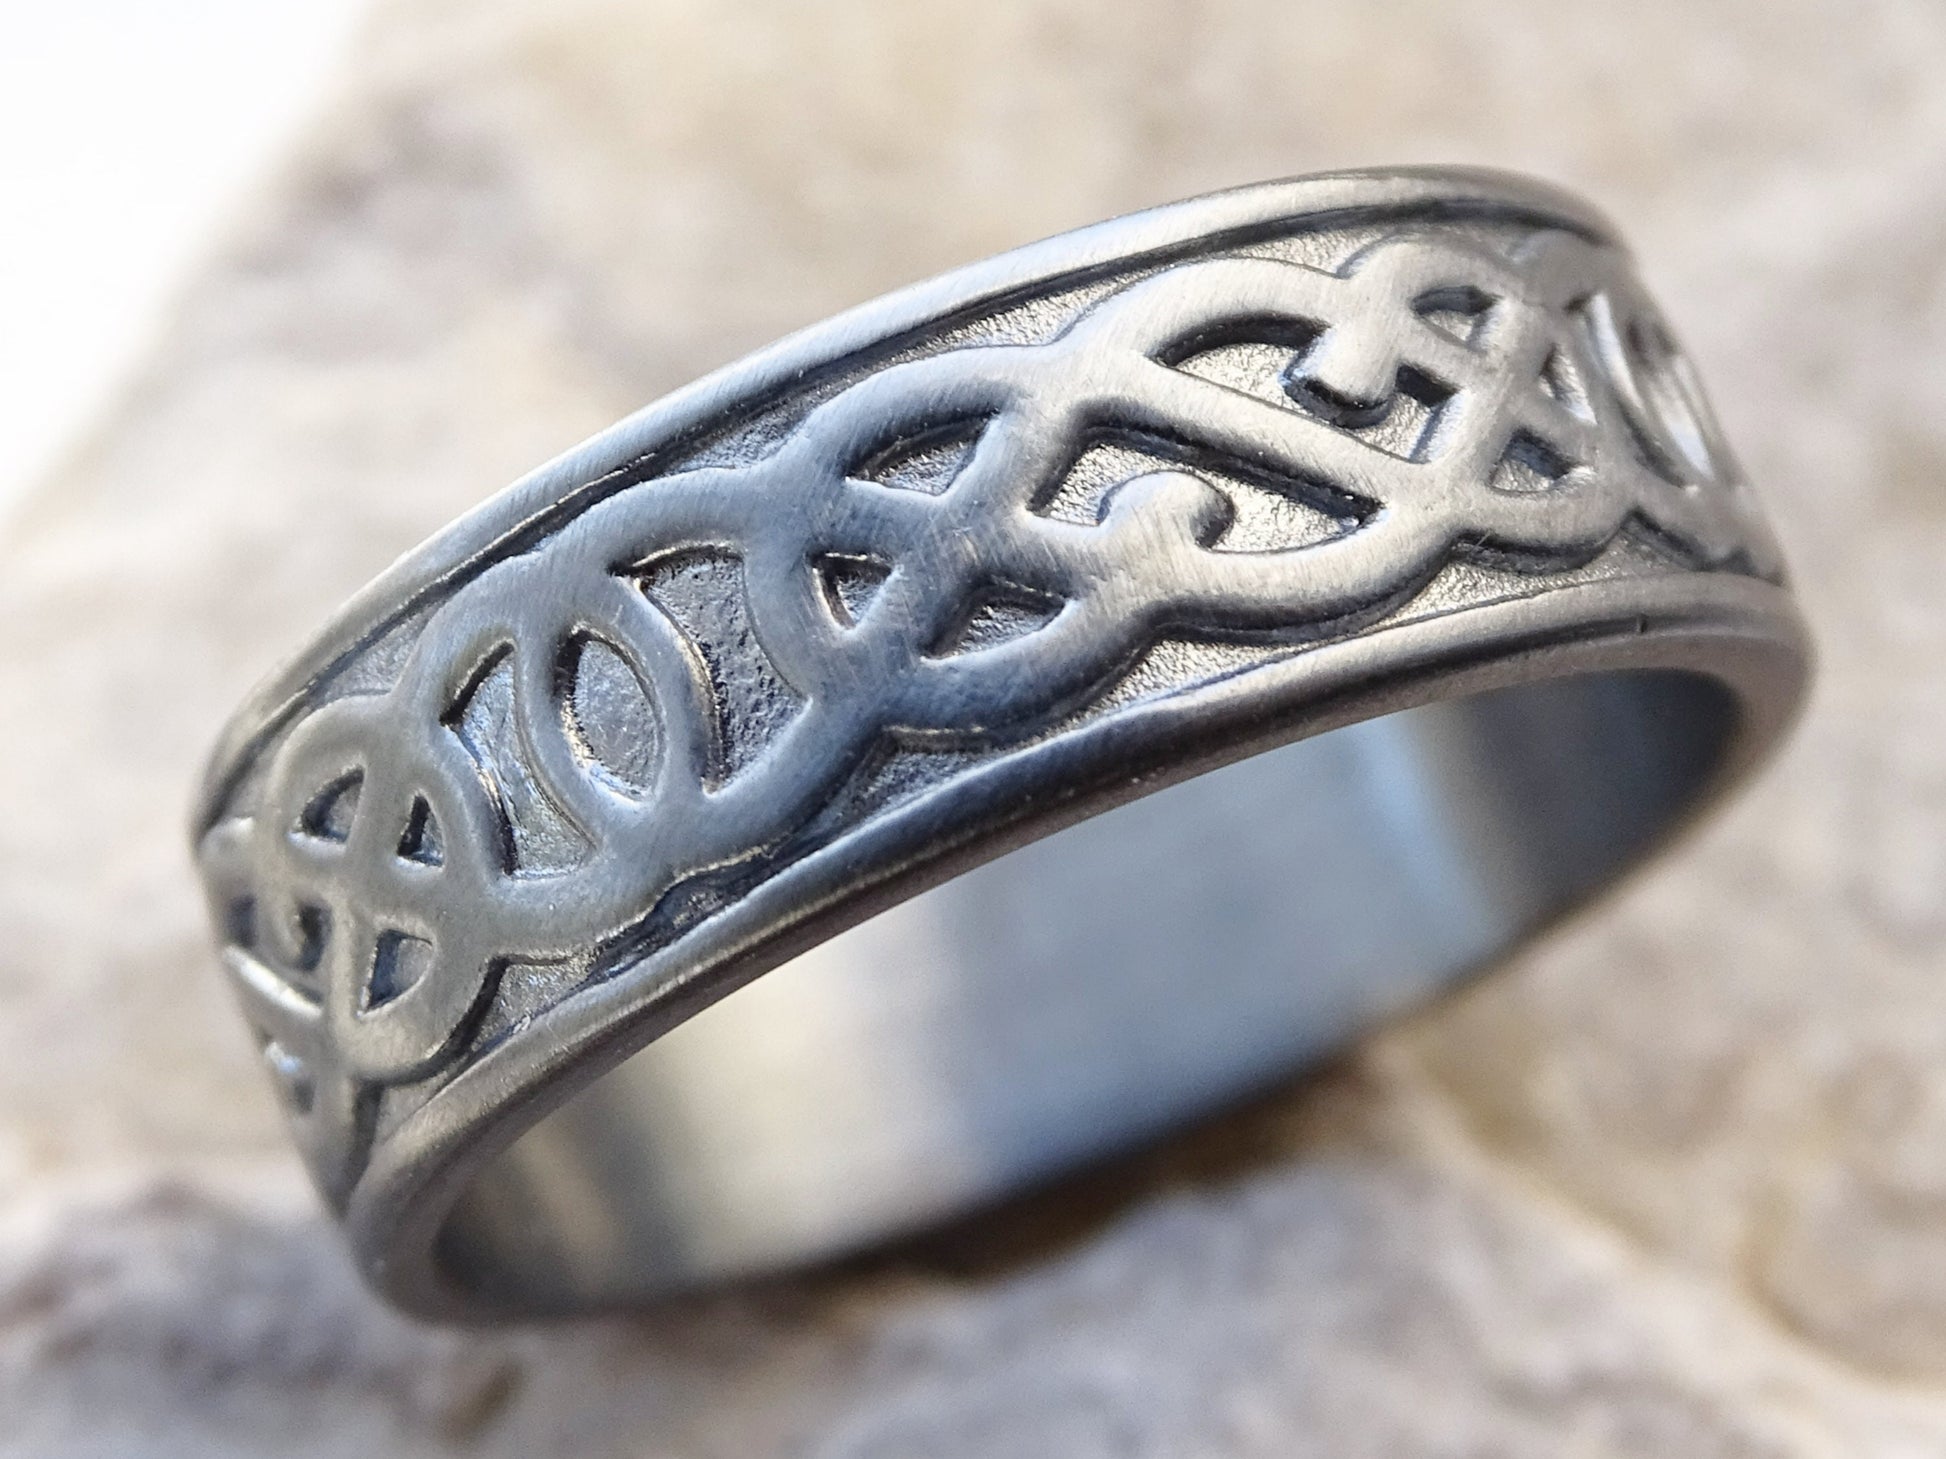 black viking silver ring, celtic knot ring black silver, knot ring celtic eternity ring silver, viking mens ring, viking wedding band silver - CrazyAss Jewelry Designs